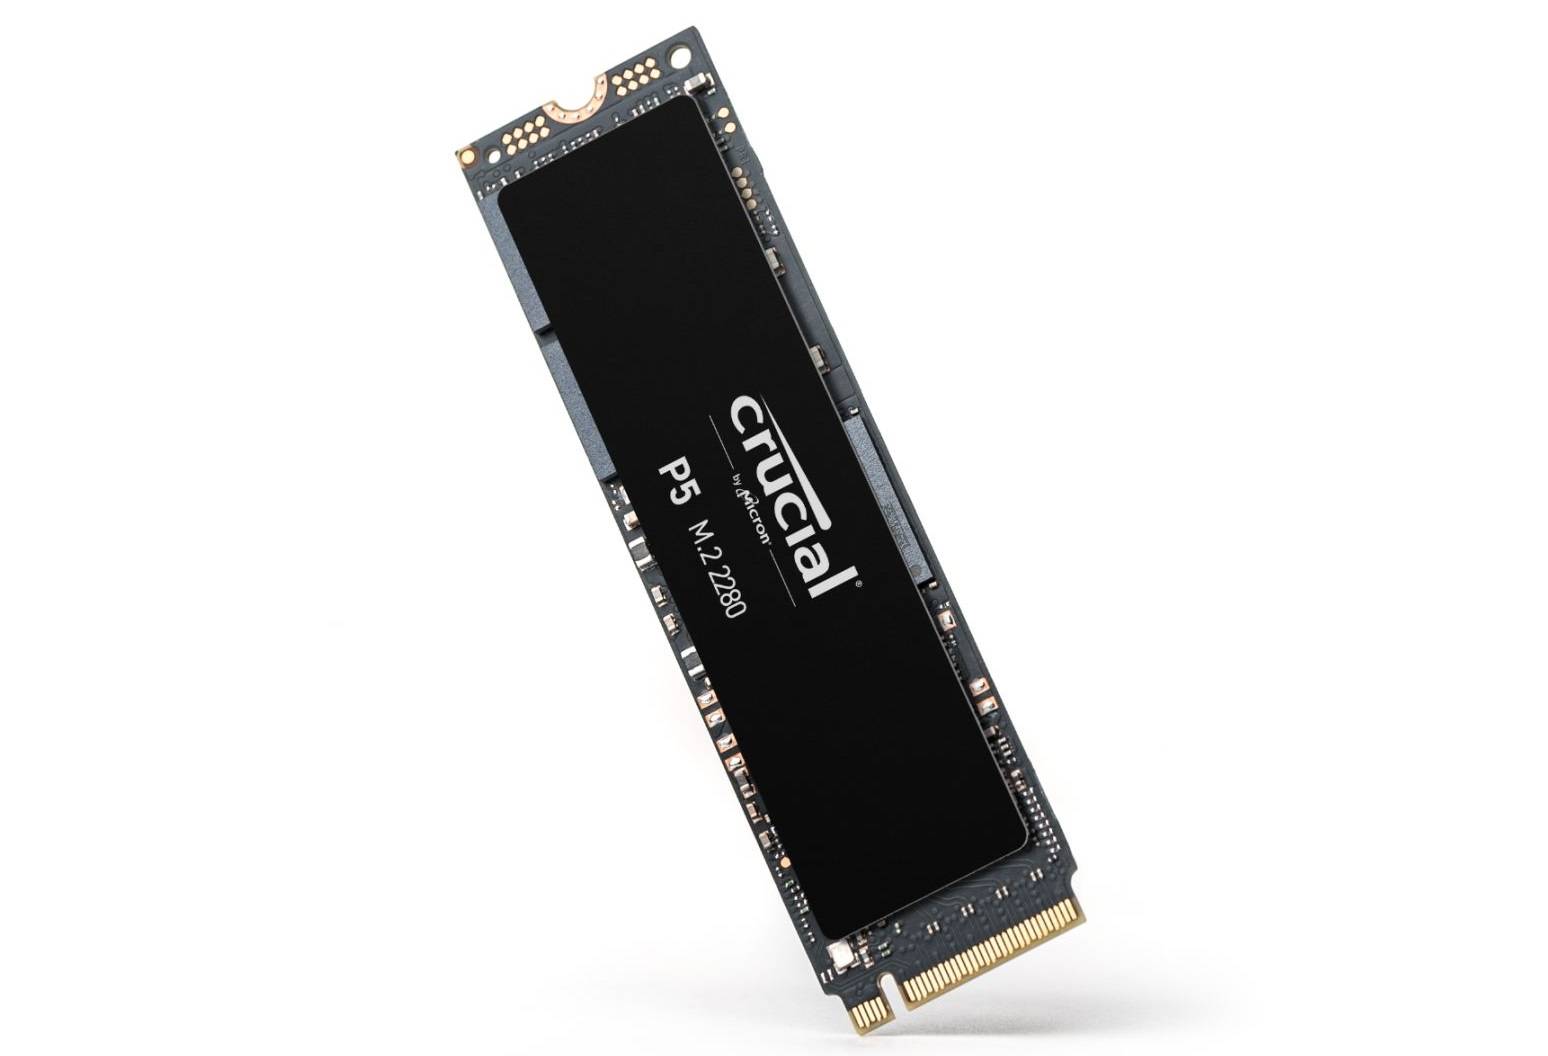 Crucial P5 PCIe NVMe SSD